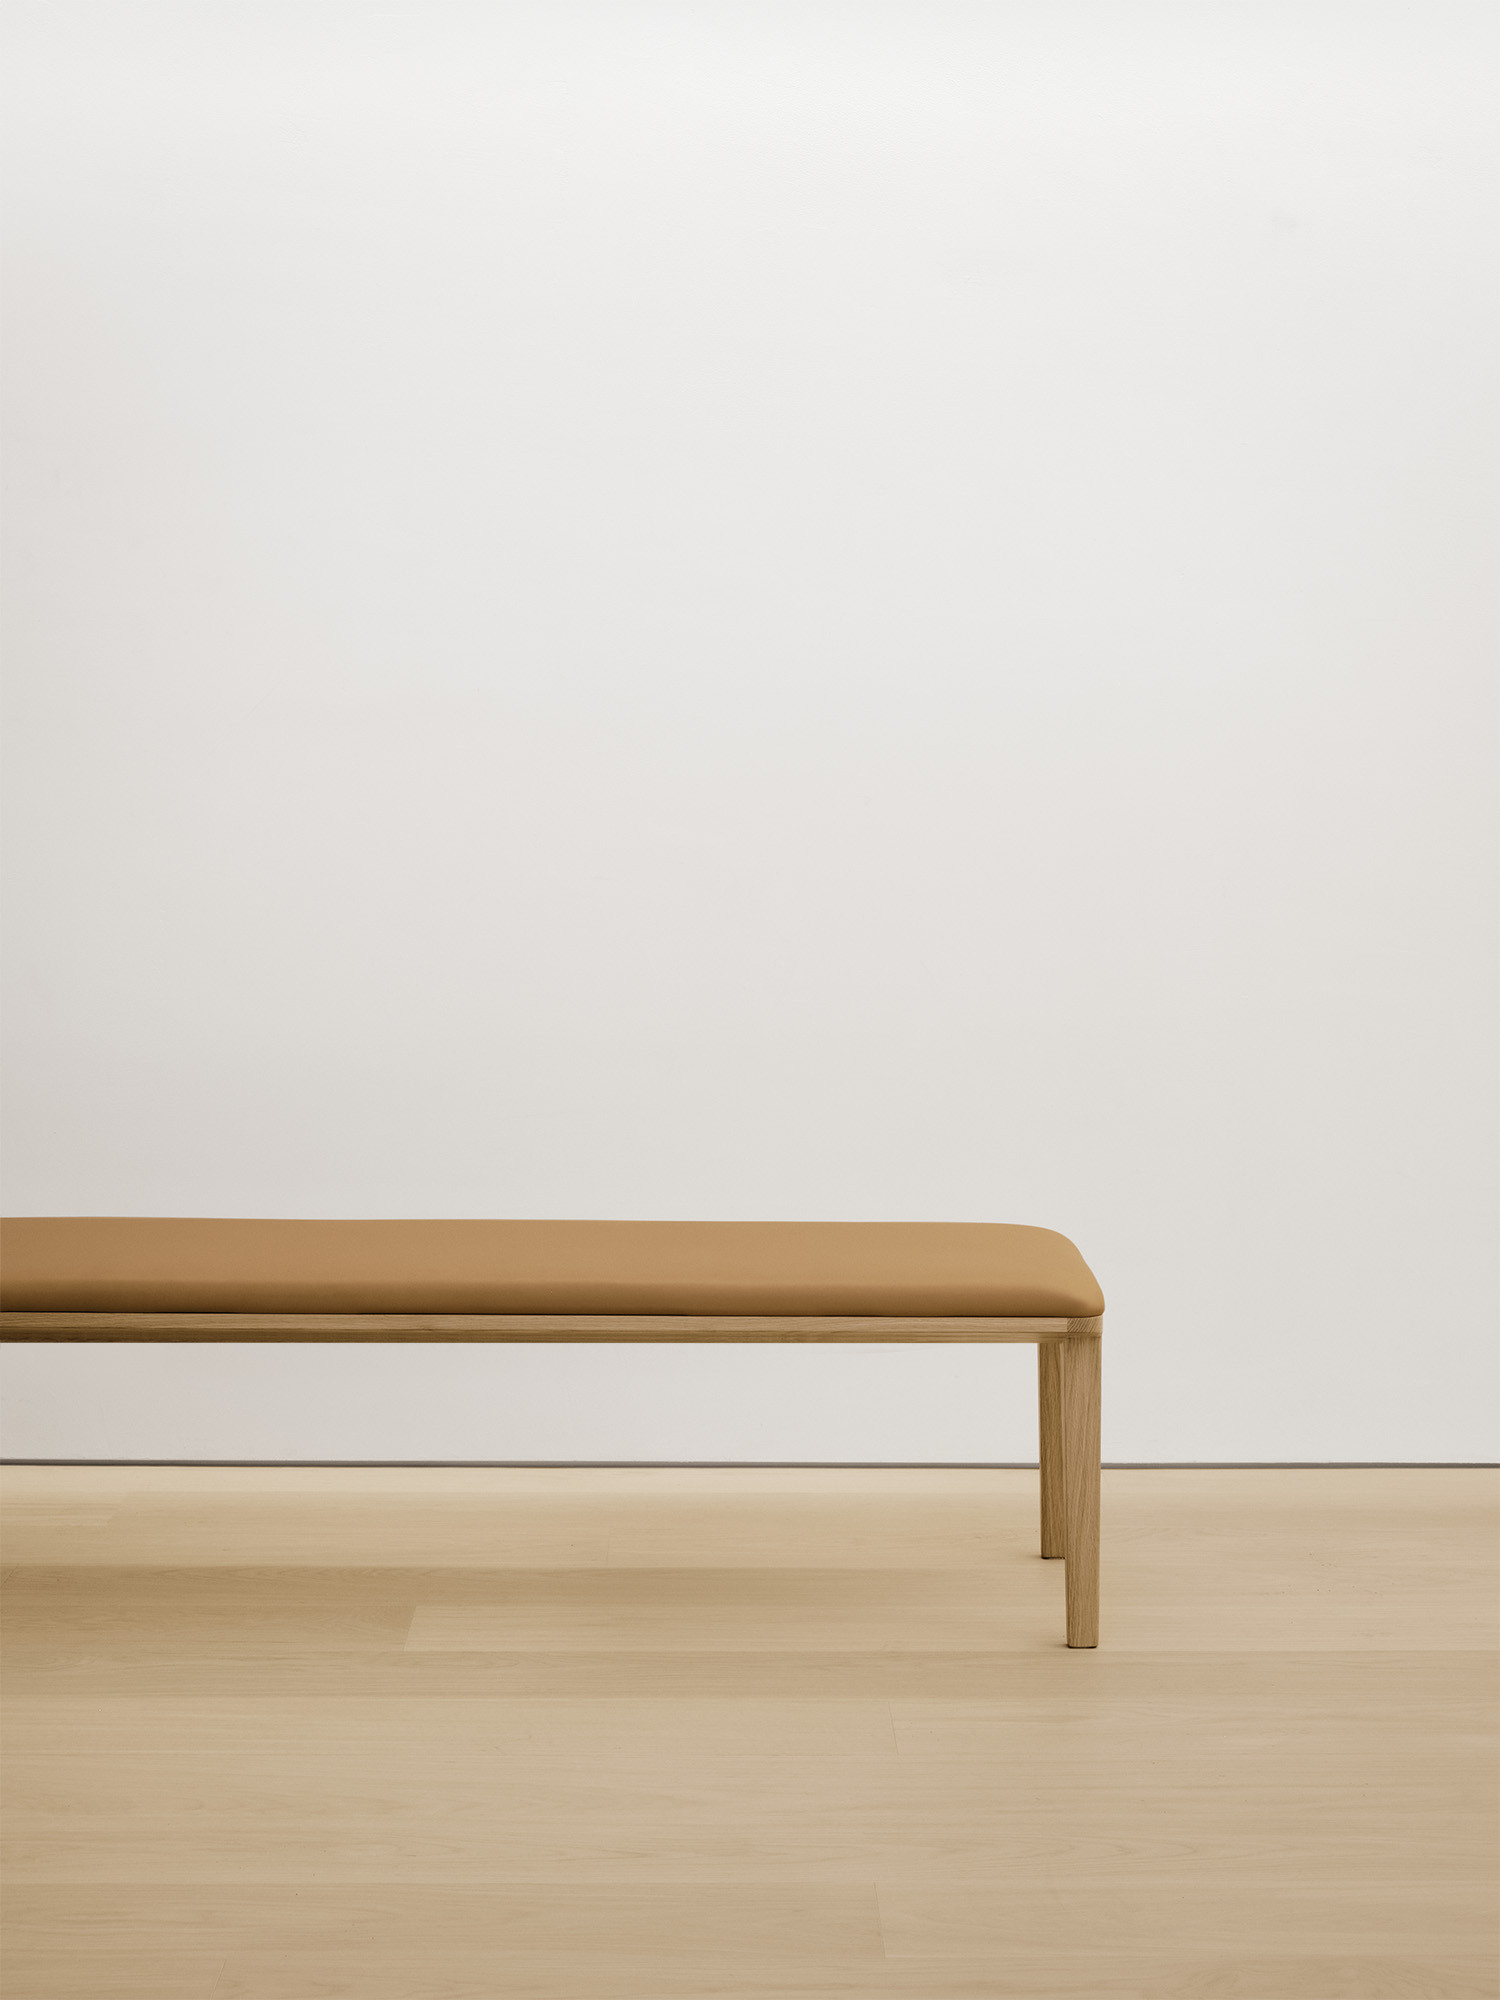   bench with solid wood seat